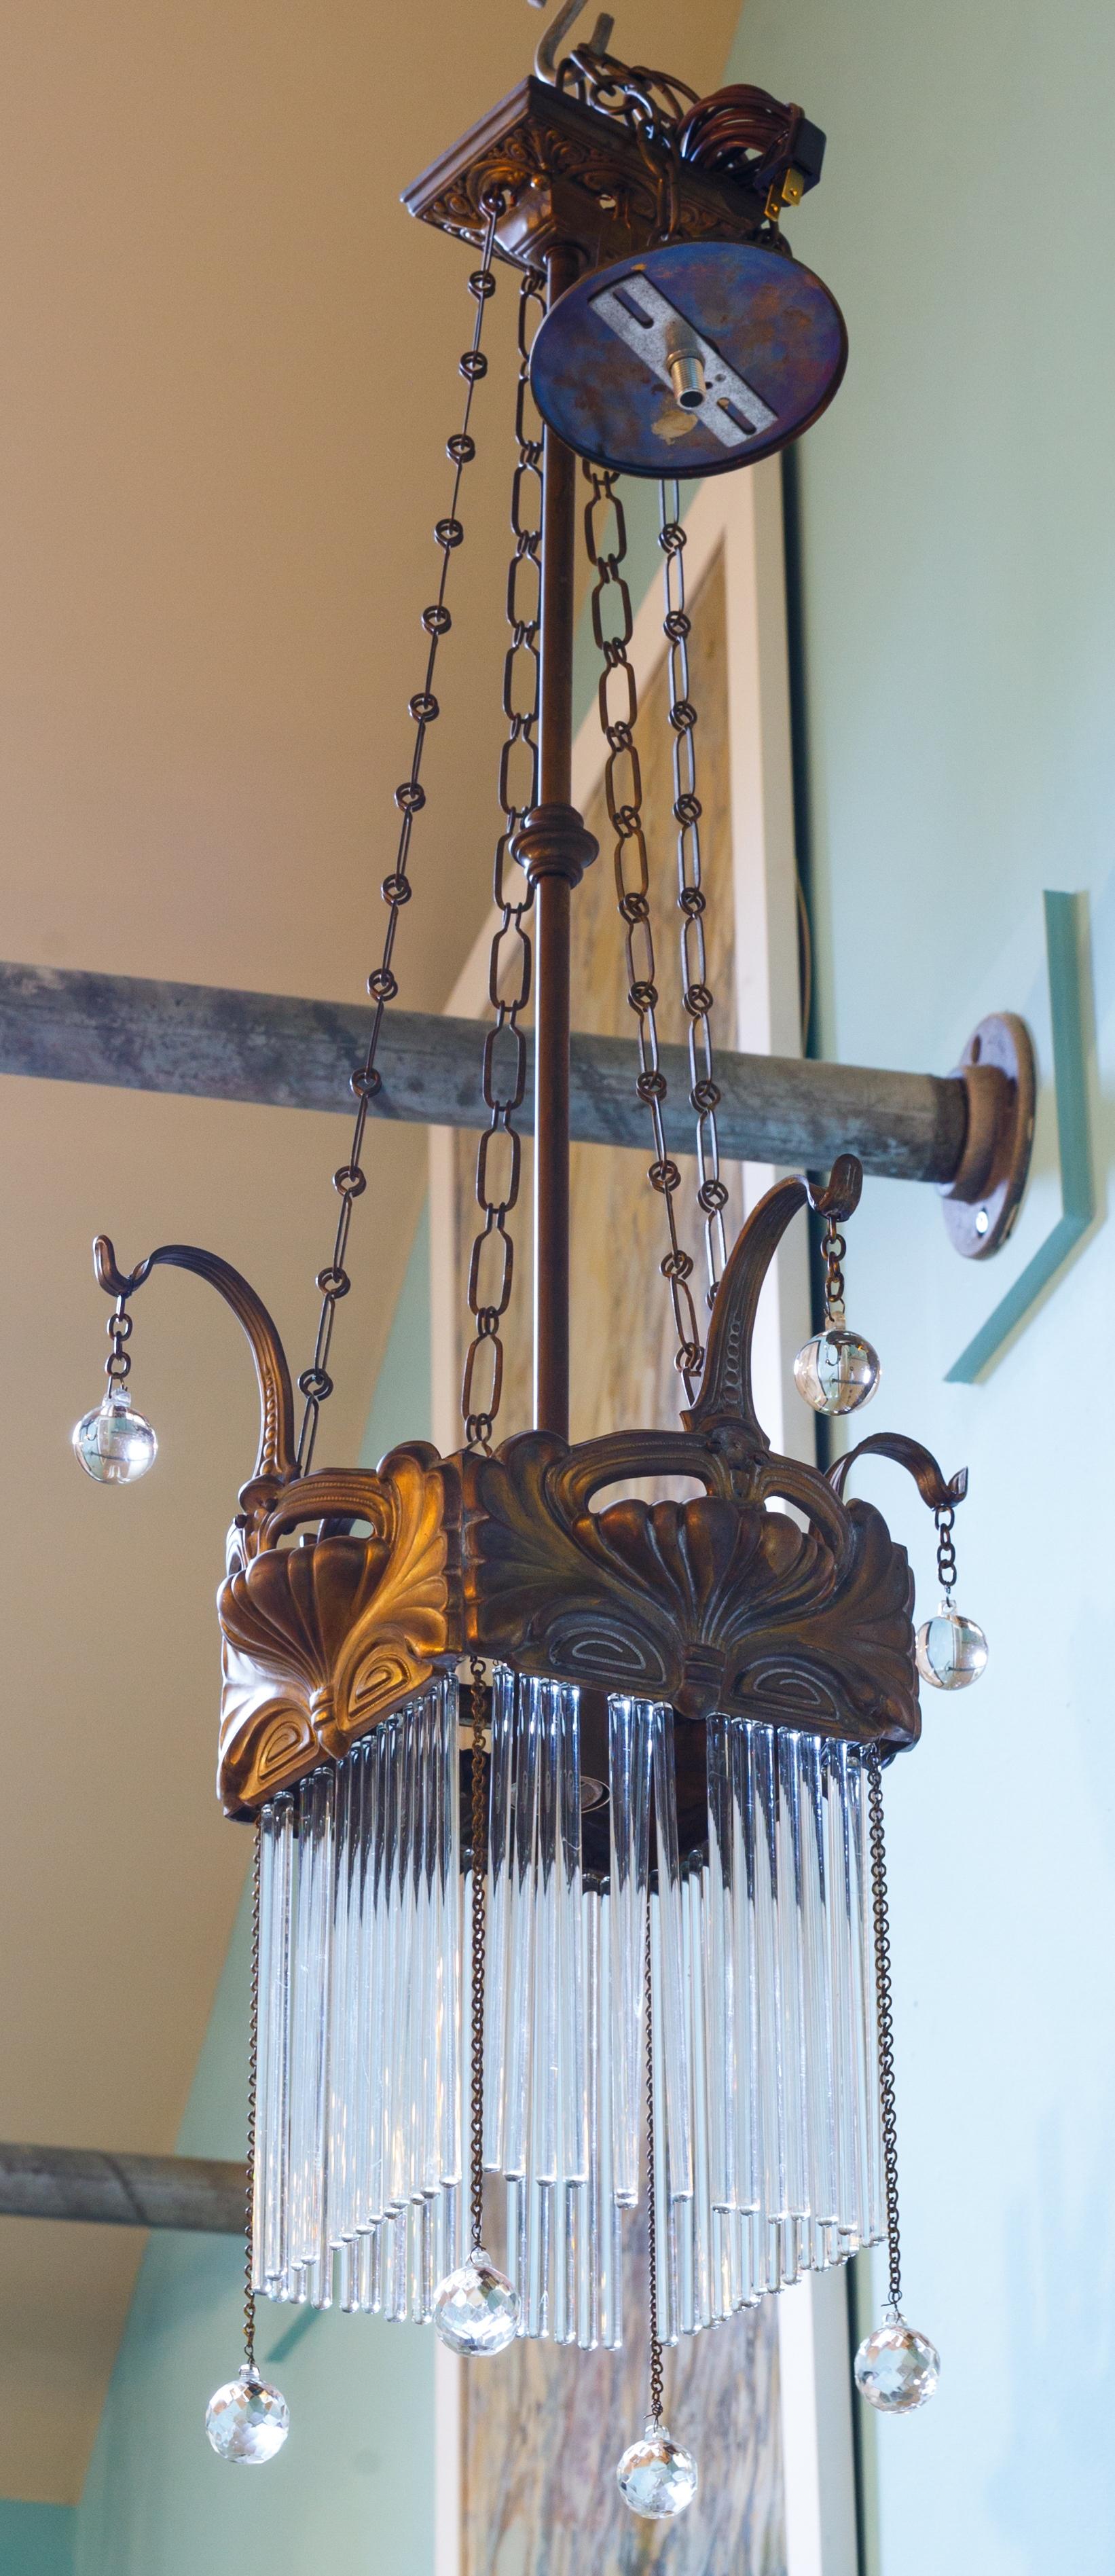 This charming art nouveau chandelier is one of the few art nouvea pendants we have encountered that is square. A unique take on the epochal style. Wonderfully crafted hand-hammered repousse brass  with all original crystals. The light has all its